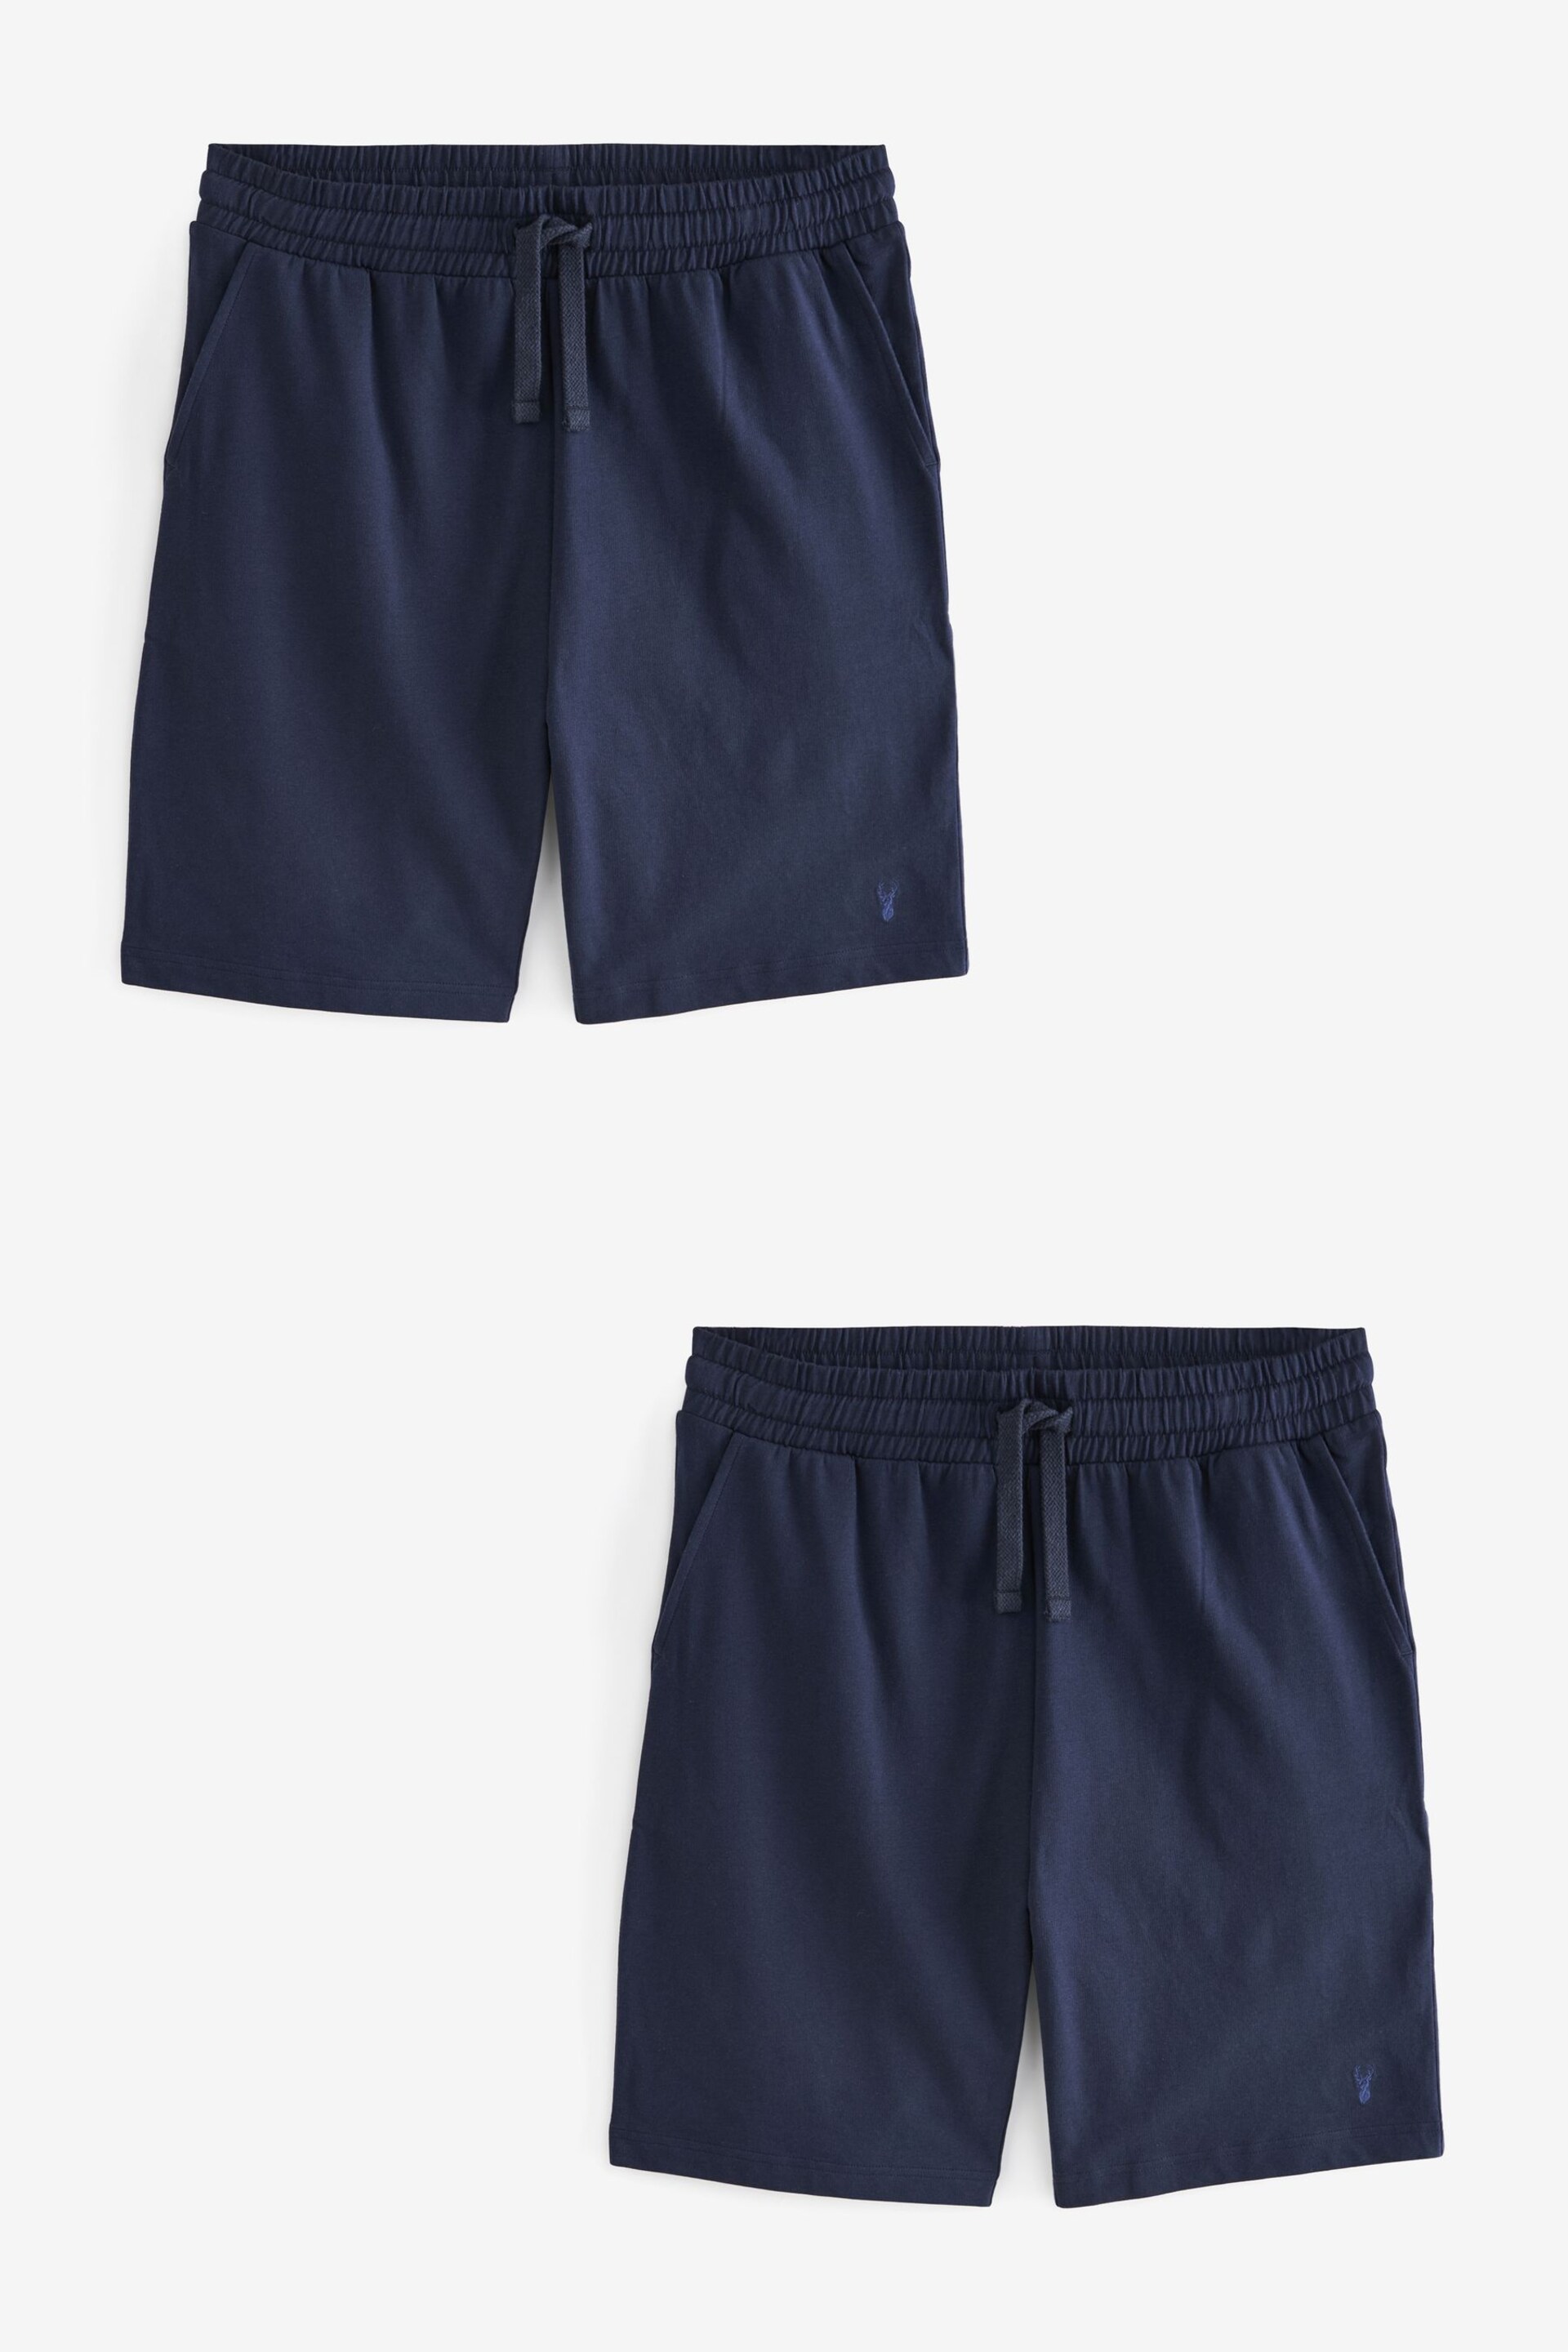 Navy Blue Lightweight Jogger Shorts 2 Pack - Image 6 of 11